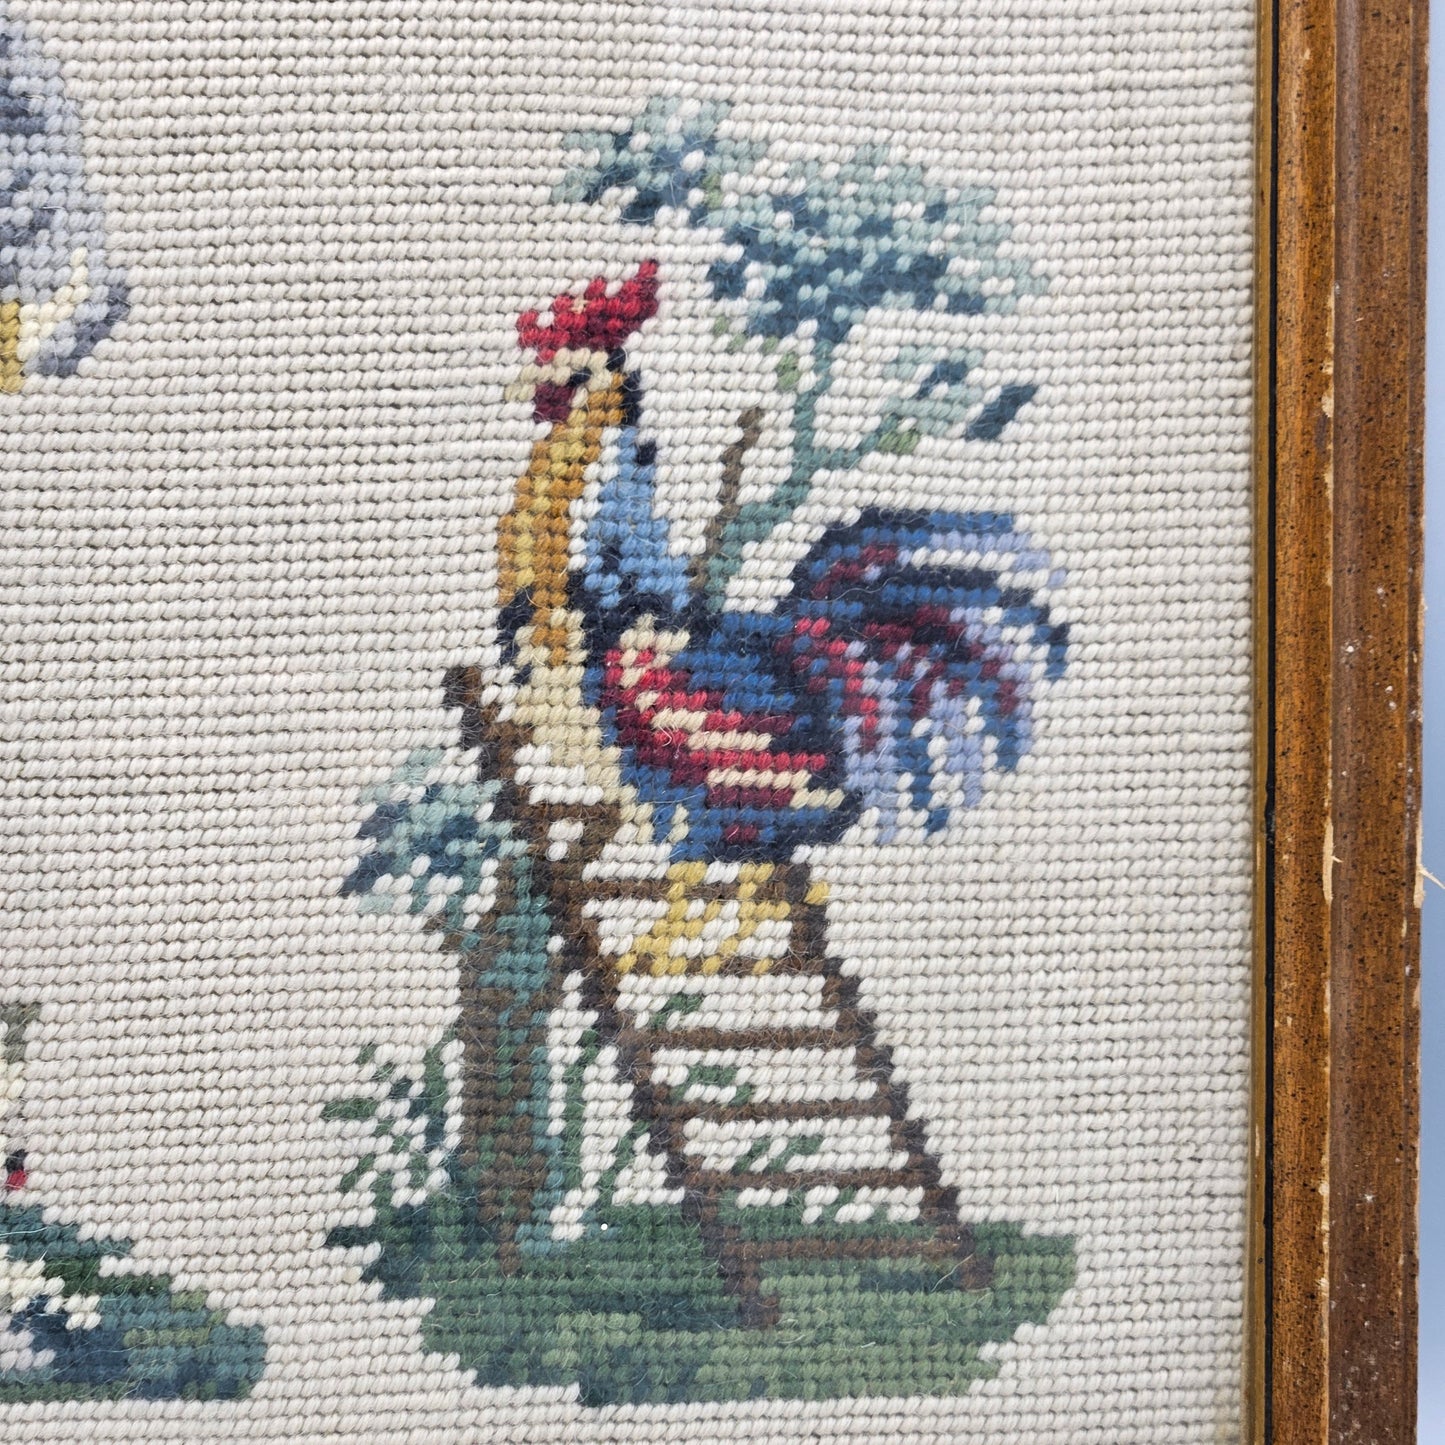 Vintage Framed Needlepoint Artwork with Roosters, Dogs & Cats